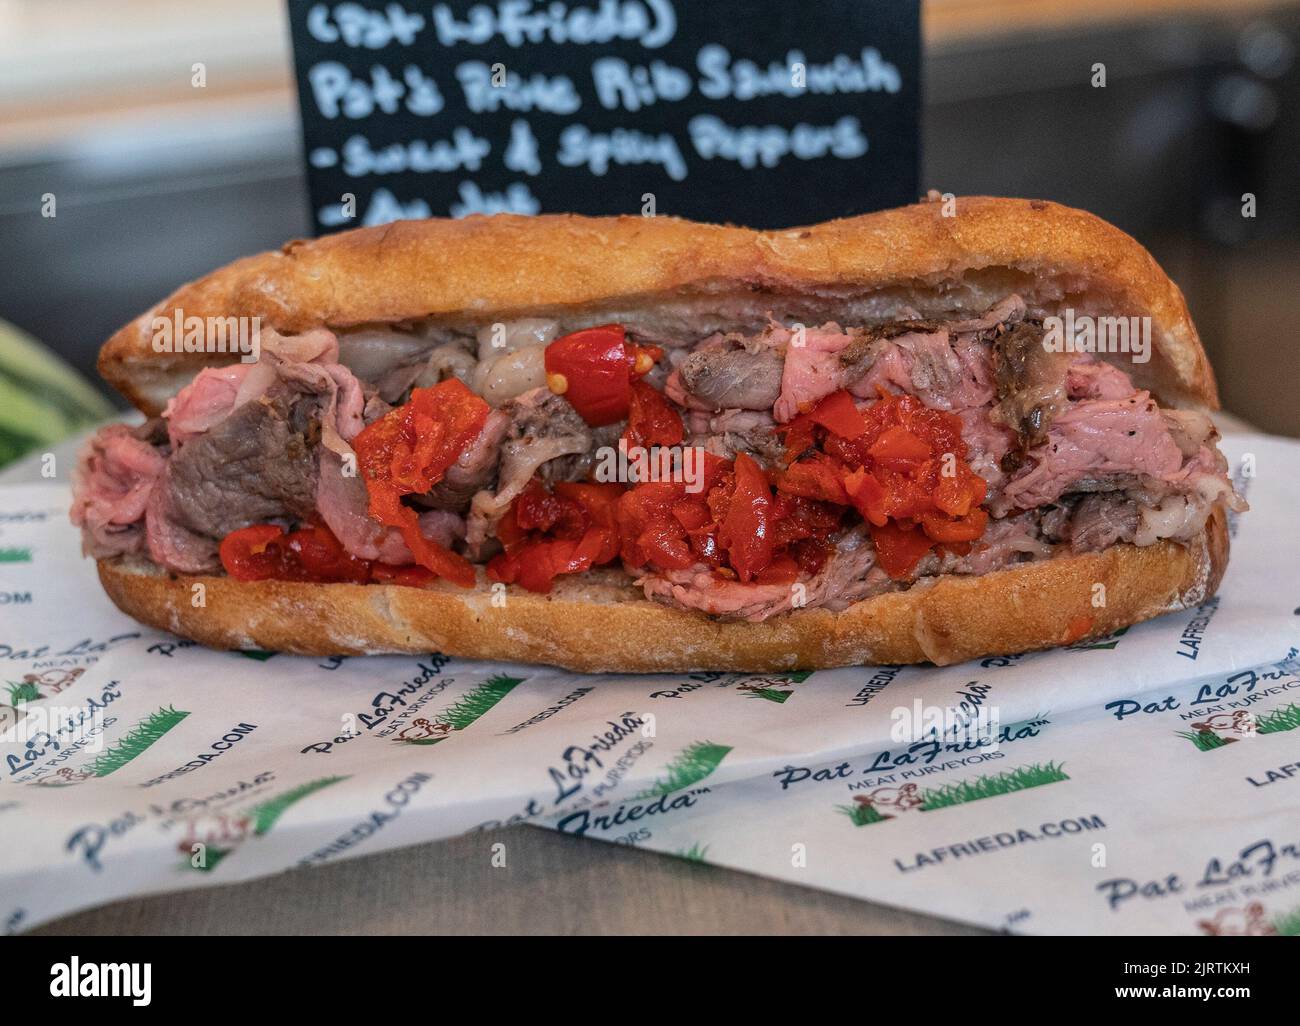 https://c8.alamy.com/comp/2JRTKXH/new-york-united-states-25th-aug-2022-prime-rib-sandwich-by-lafrieda-meat-co-on-display-at-2022-us-open-food-tasting-media-preview-at-aces-restaurant-on-arthur-ashe-stadium-photo-by-lev-radinpacific-press-credit-pacific-press-media-production-corpalamy-live-news-2JRTKXH.jpg